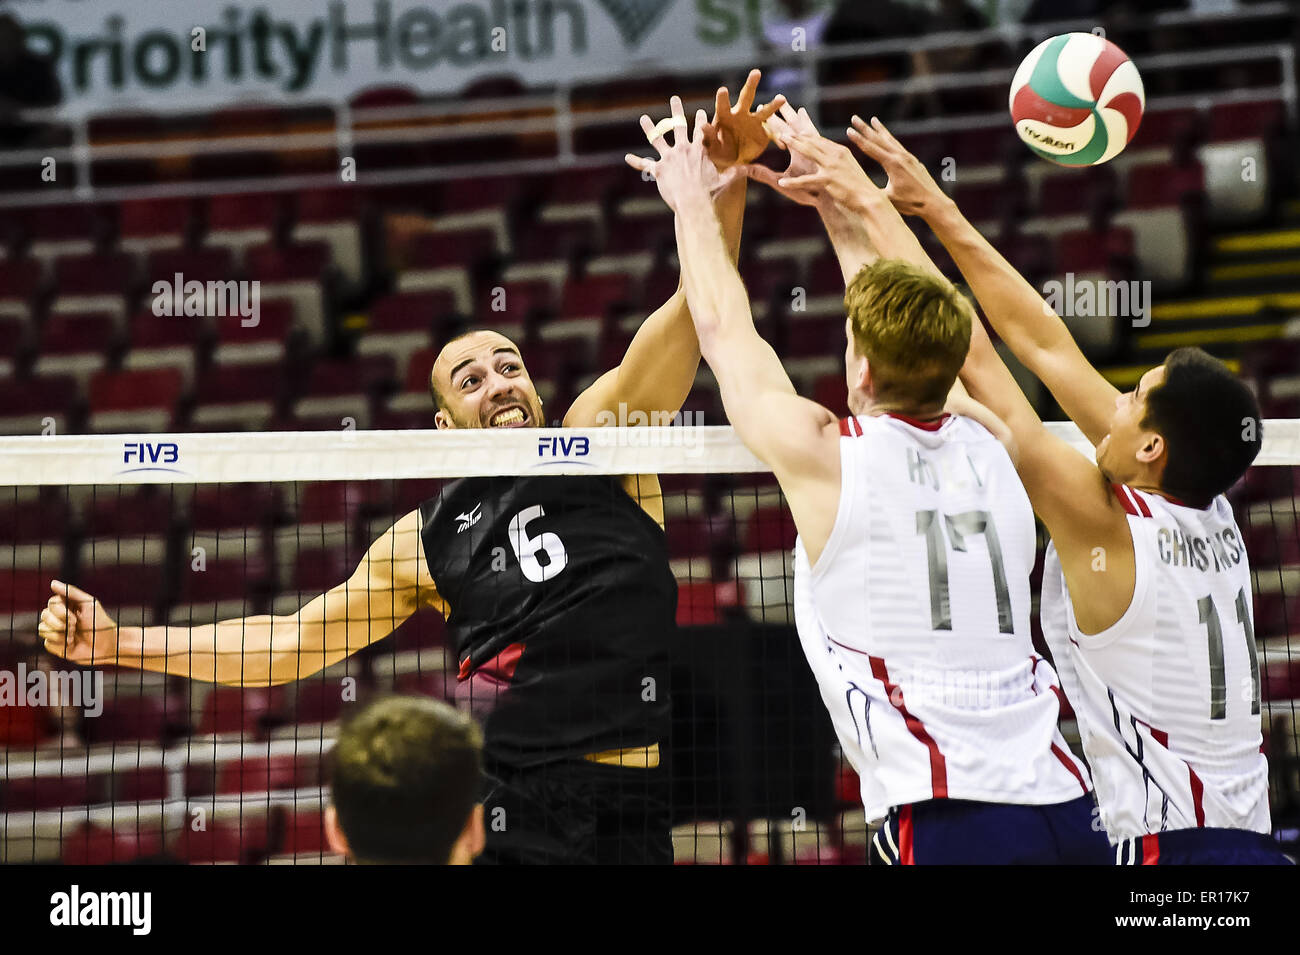 Detroit, Michigan, USA. 24th May, 2015. Justin Duff #6 (Canada) spikes the ball during a NORCECA qualifying game between Canada and USA. Canada won the game in five sets.Canada and USA both advance to the World Cup in Japan for a chance to qualify for the 2016 Olympics in Rio de Janeiro. © Scott Hasse/ZUMA Wire/ZUMAPRESS.com/Alamy Live News Stock Photo